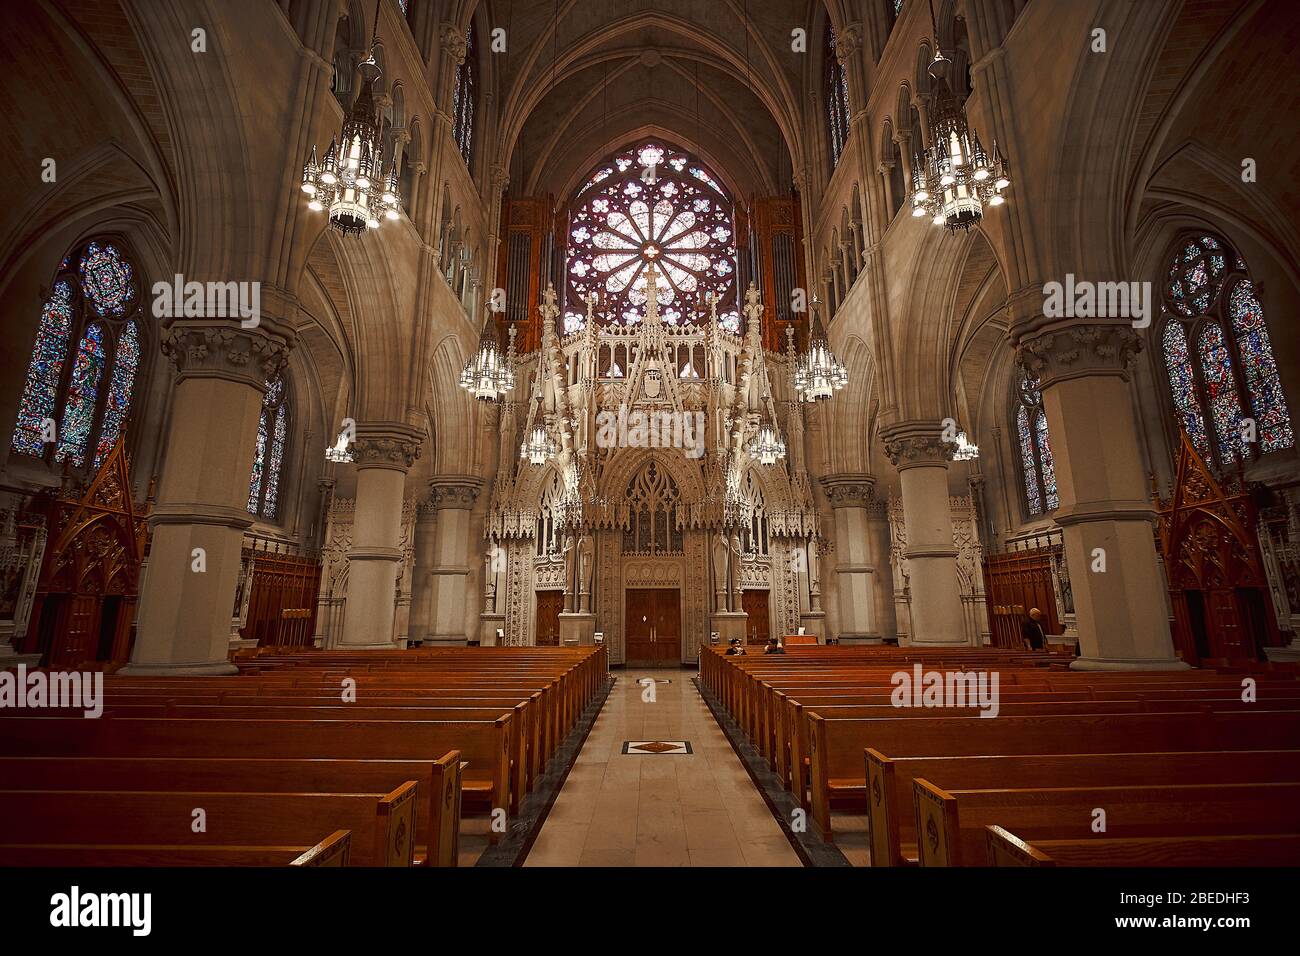 Interior view of the Cathedral Basilica of the Sacred Heart cathedral in Newark New Jersey, USA. Stock Photo